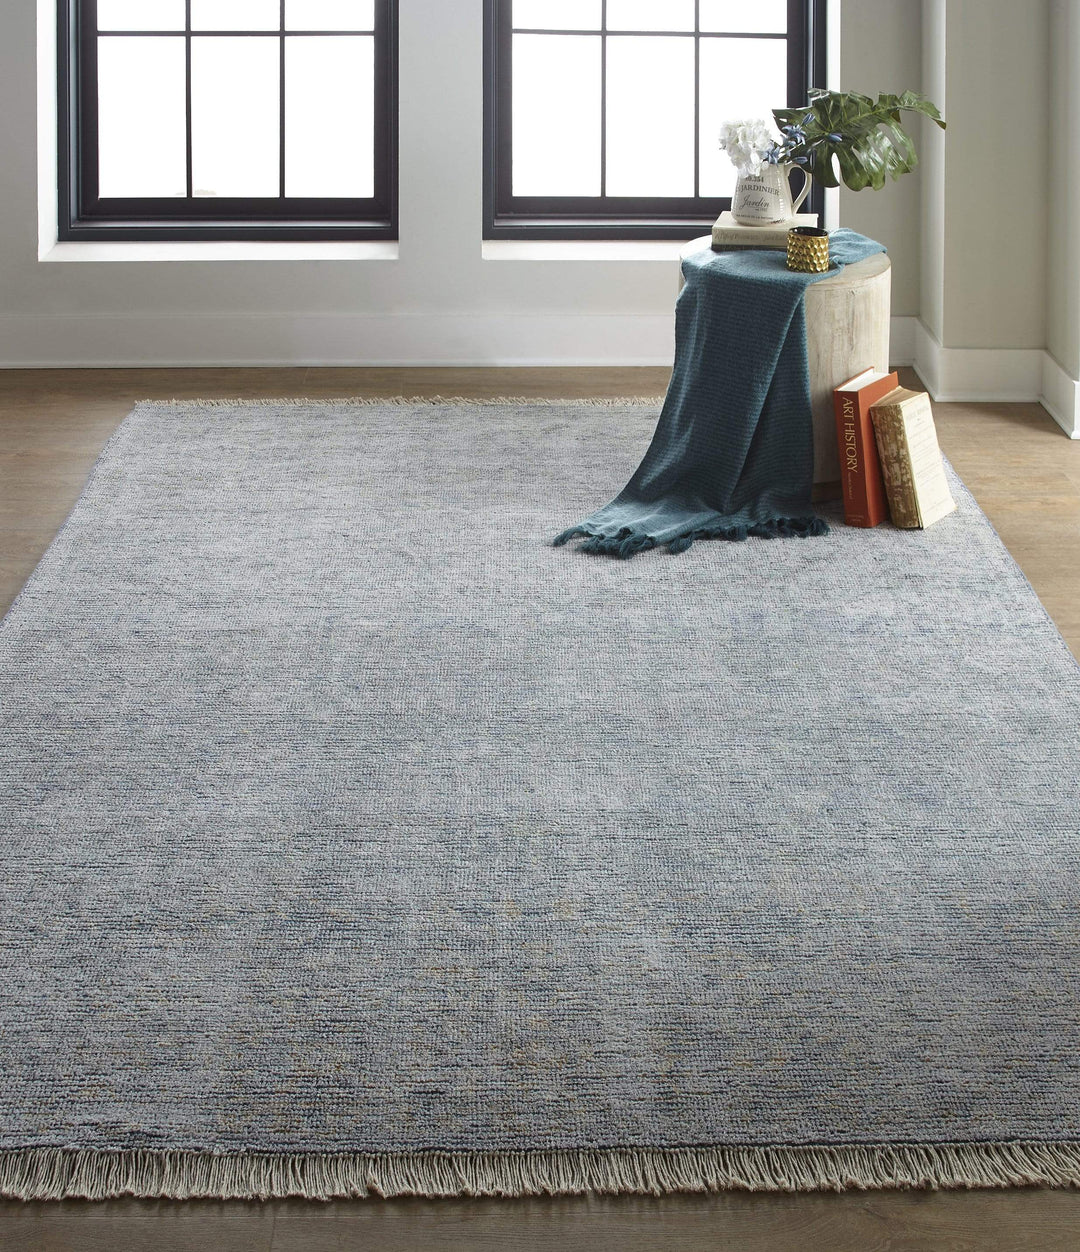 Feizy Feizy Caldwell Vintage Space Dyed Wool Rug - Aegean Blue & Gray - Available in 6 Sizes